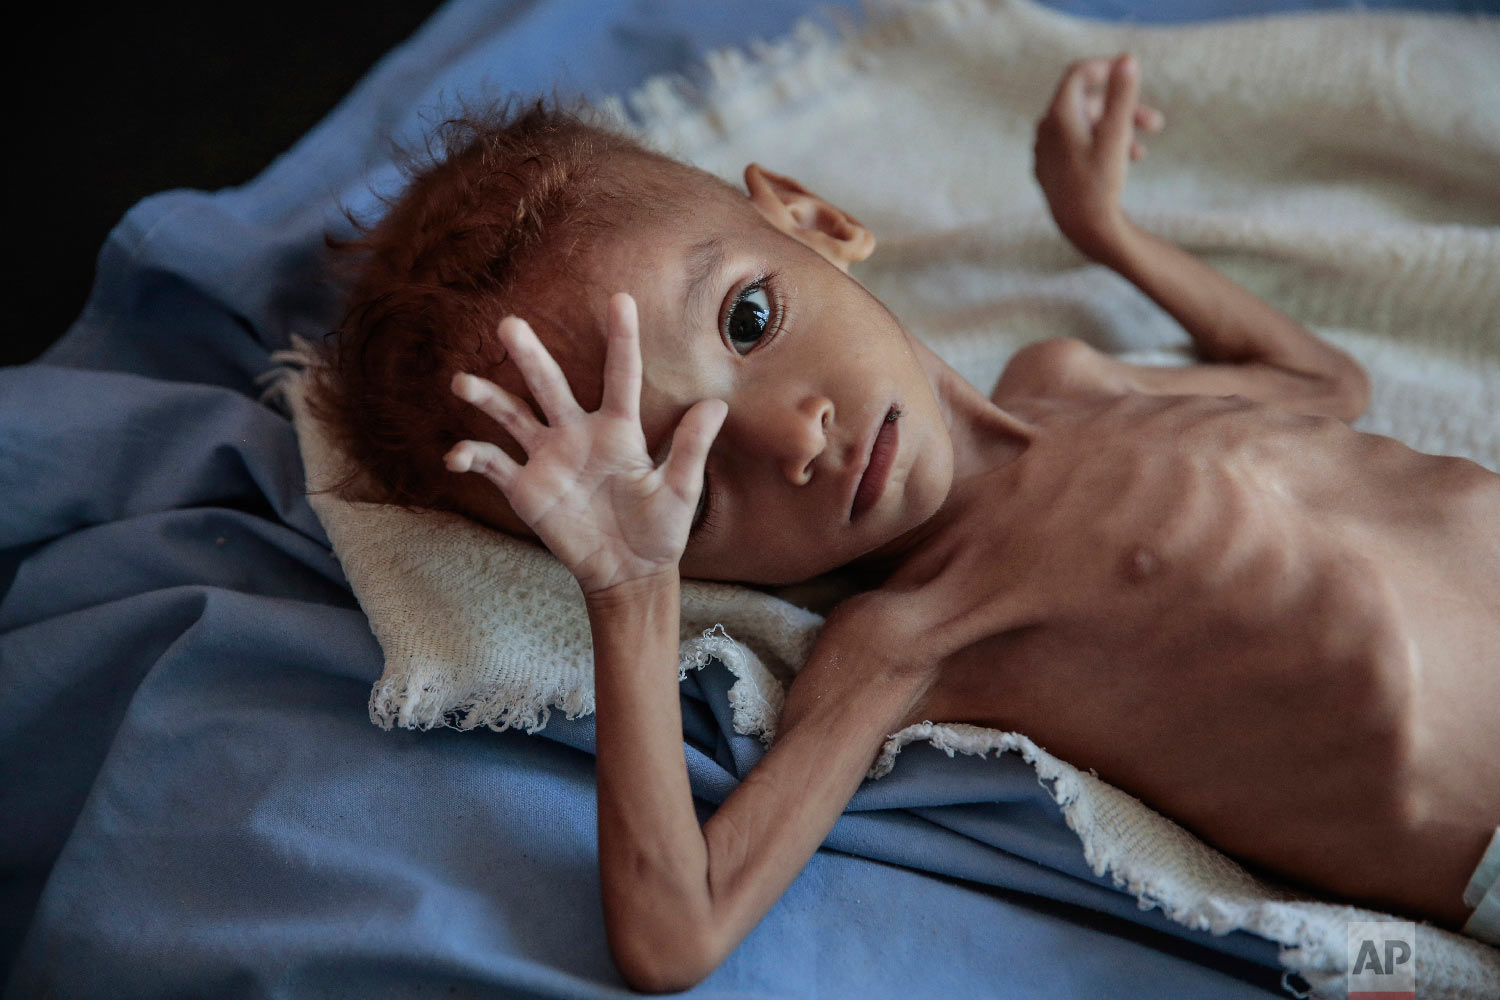  A severely malnourished boy rests on a hospital bed at the Aslam Health Center, in Hajjah, Yemen, on Oct. 1, 2018. Malnutrition, cholera, and other epidemic diseases have ravaged through displaced and impoverished communities in Yemen, threatening t